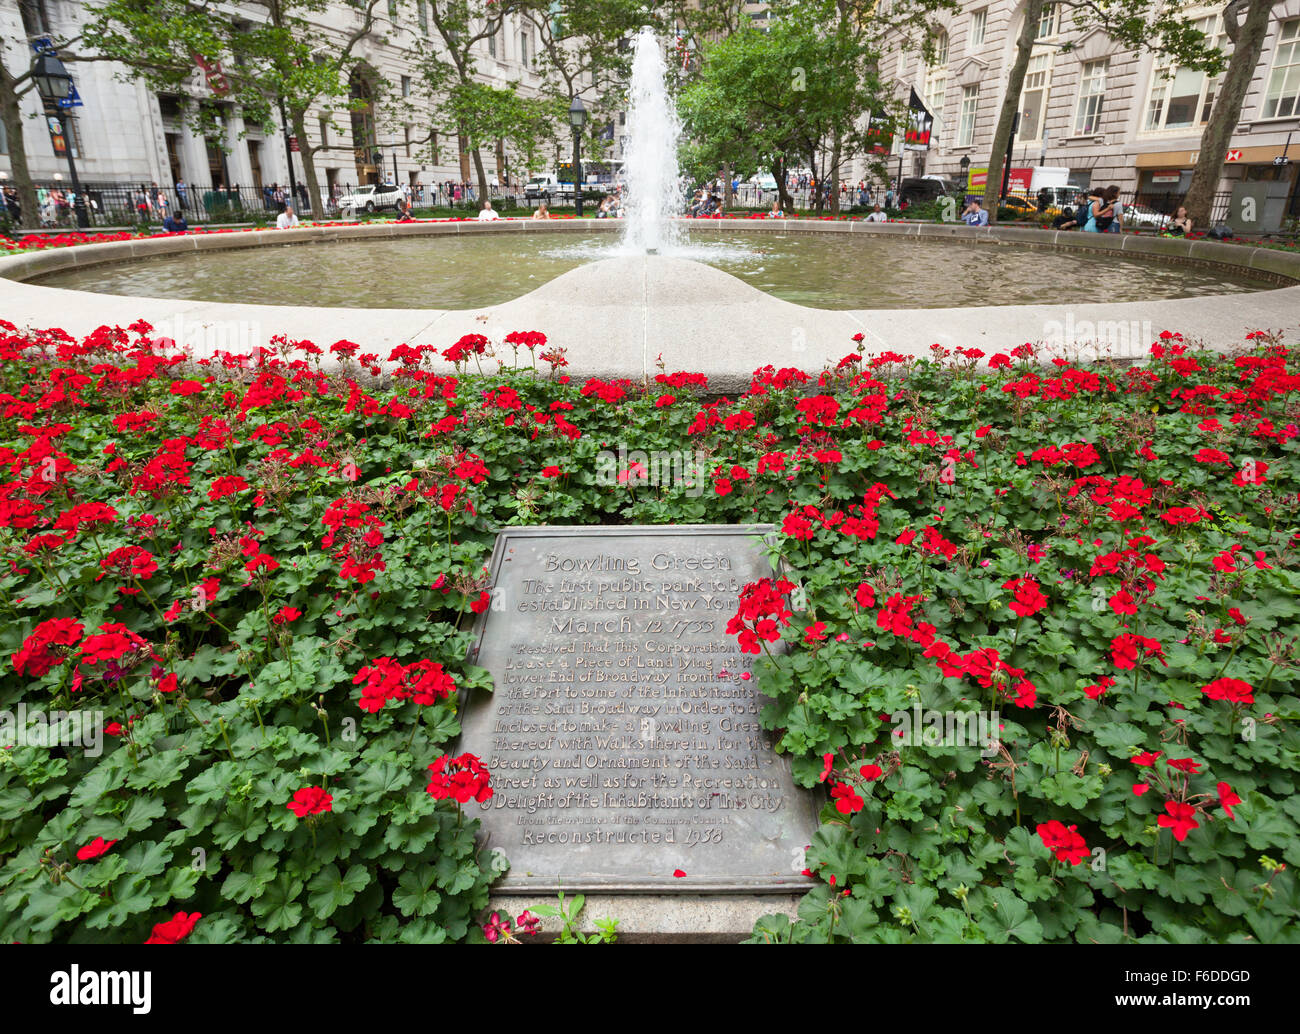 Fountain at Bowling Green park in Lower Manhattan, New York City. Stock Photo